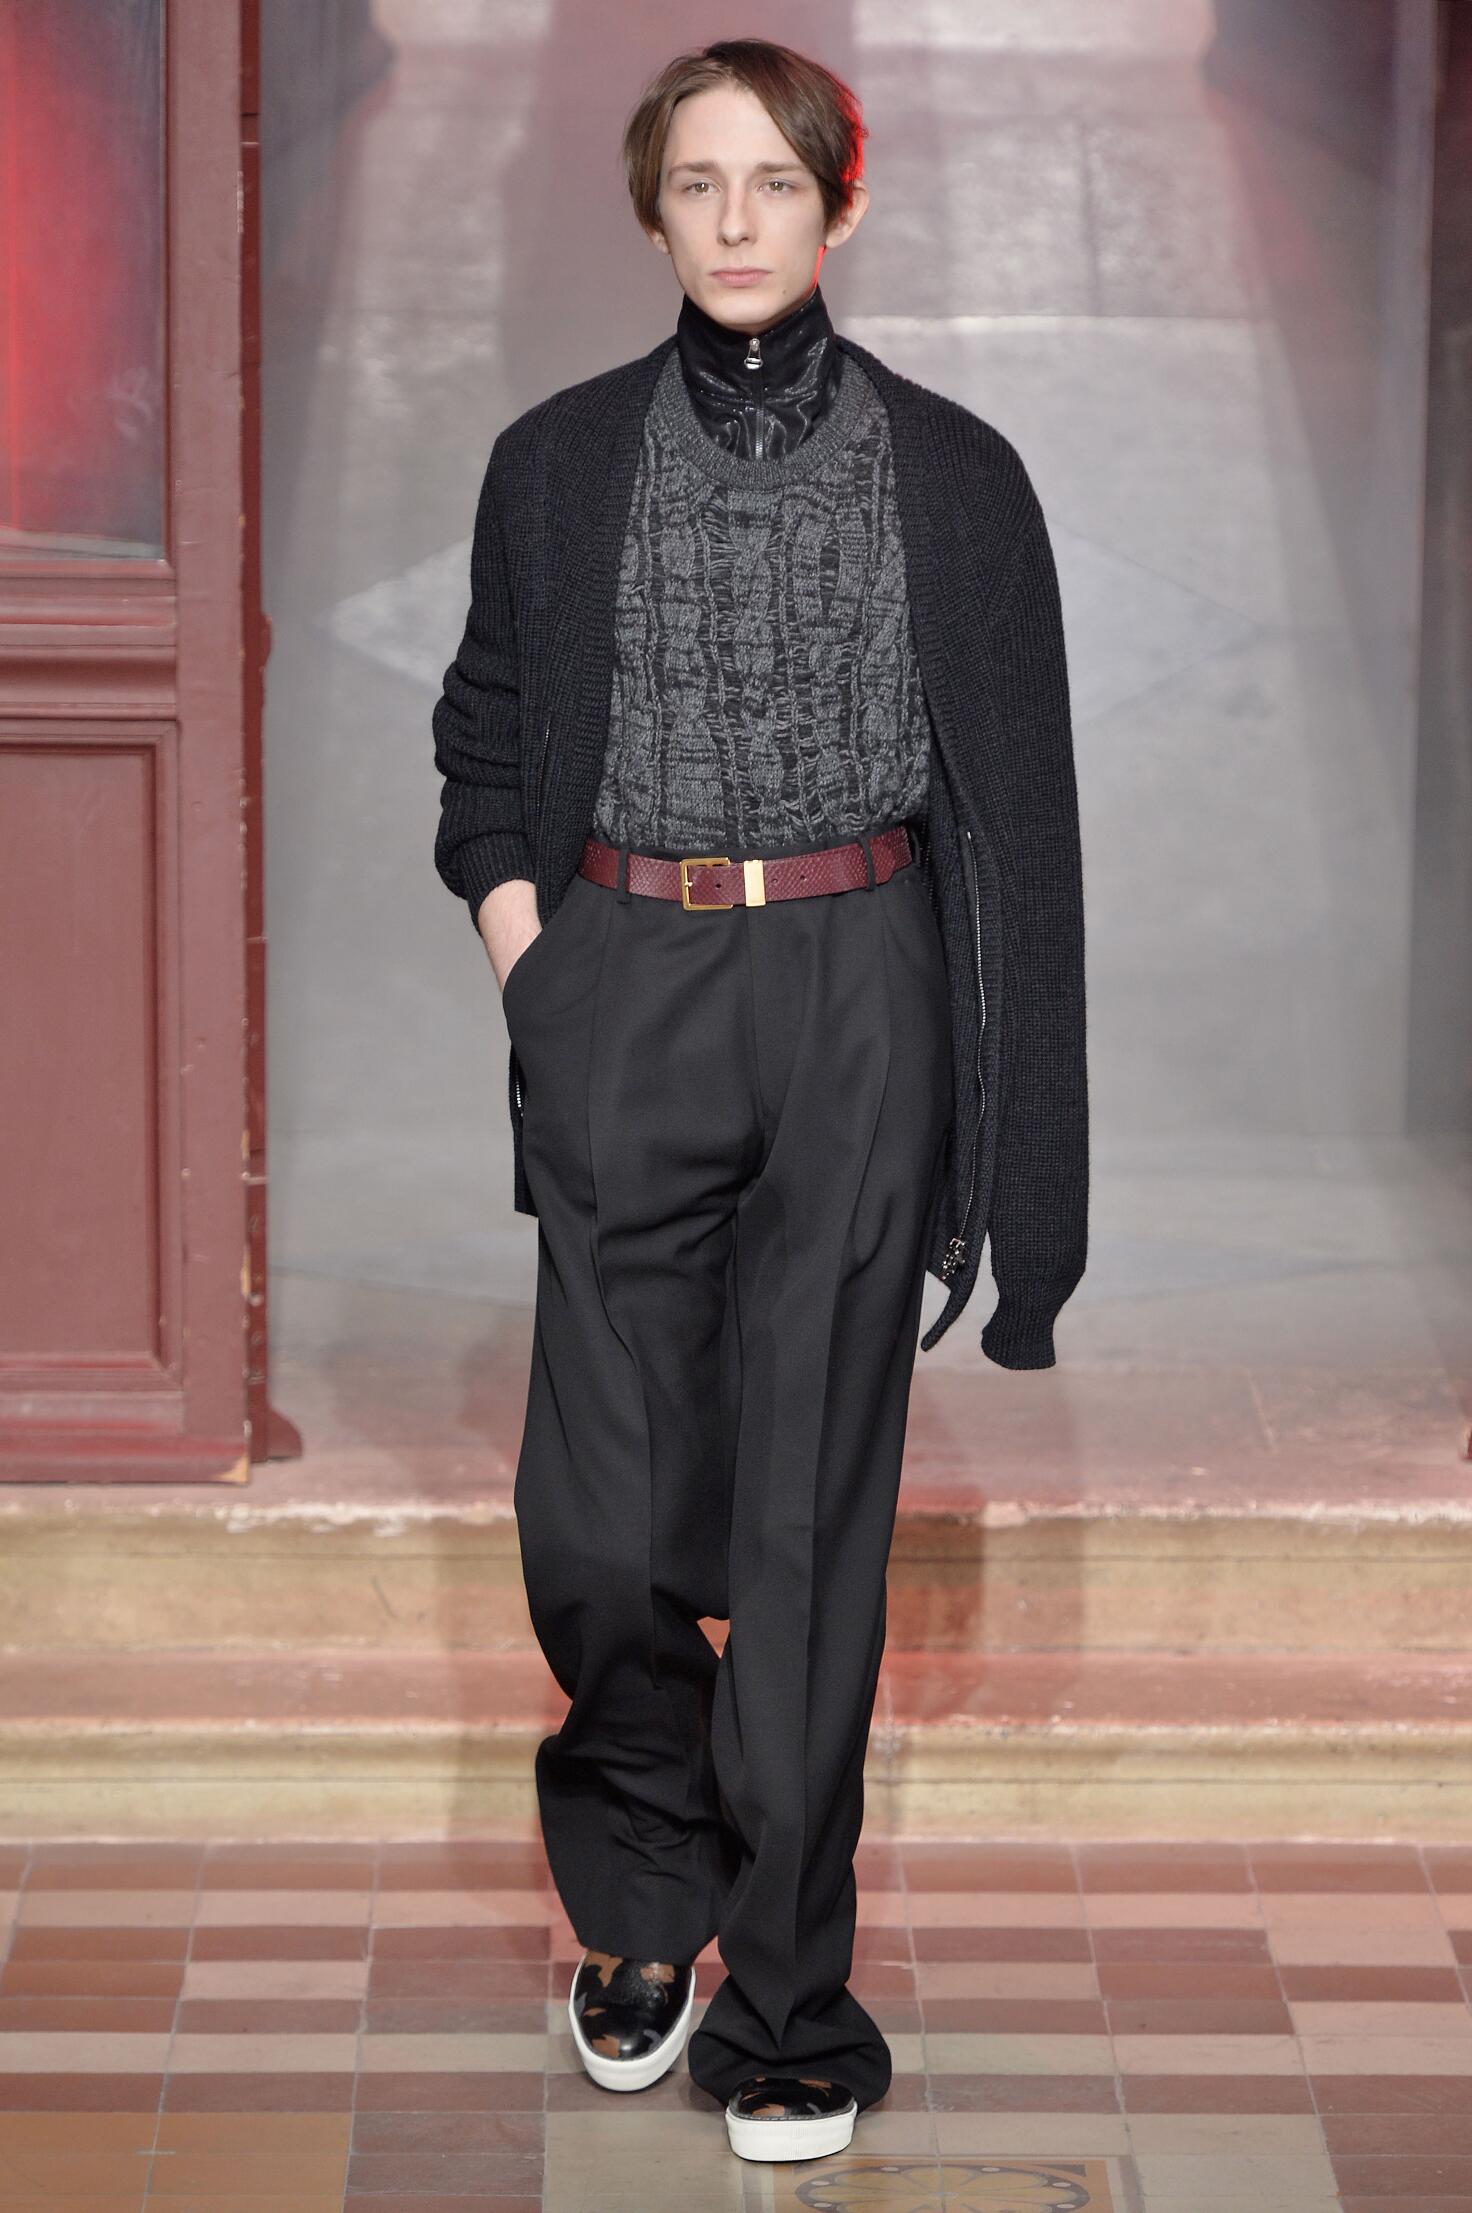 LANVIN FALL WINTER 2015-16 MEN’S COLLECTION | The Skinny Beep